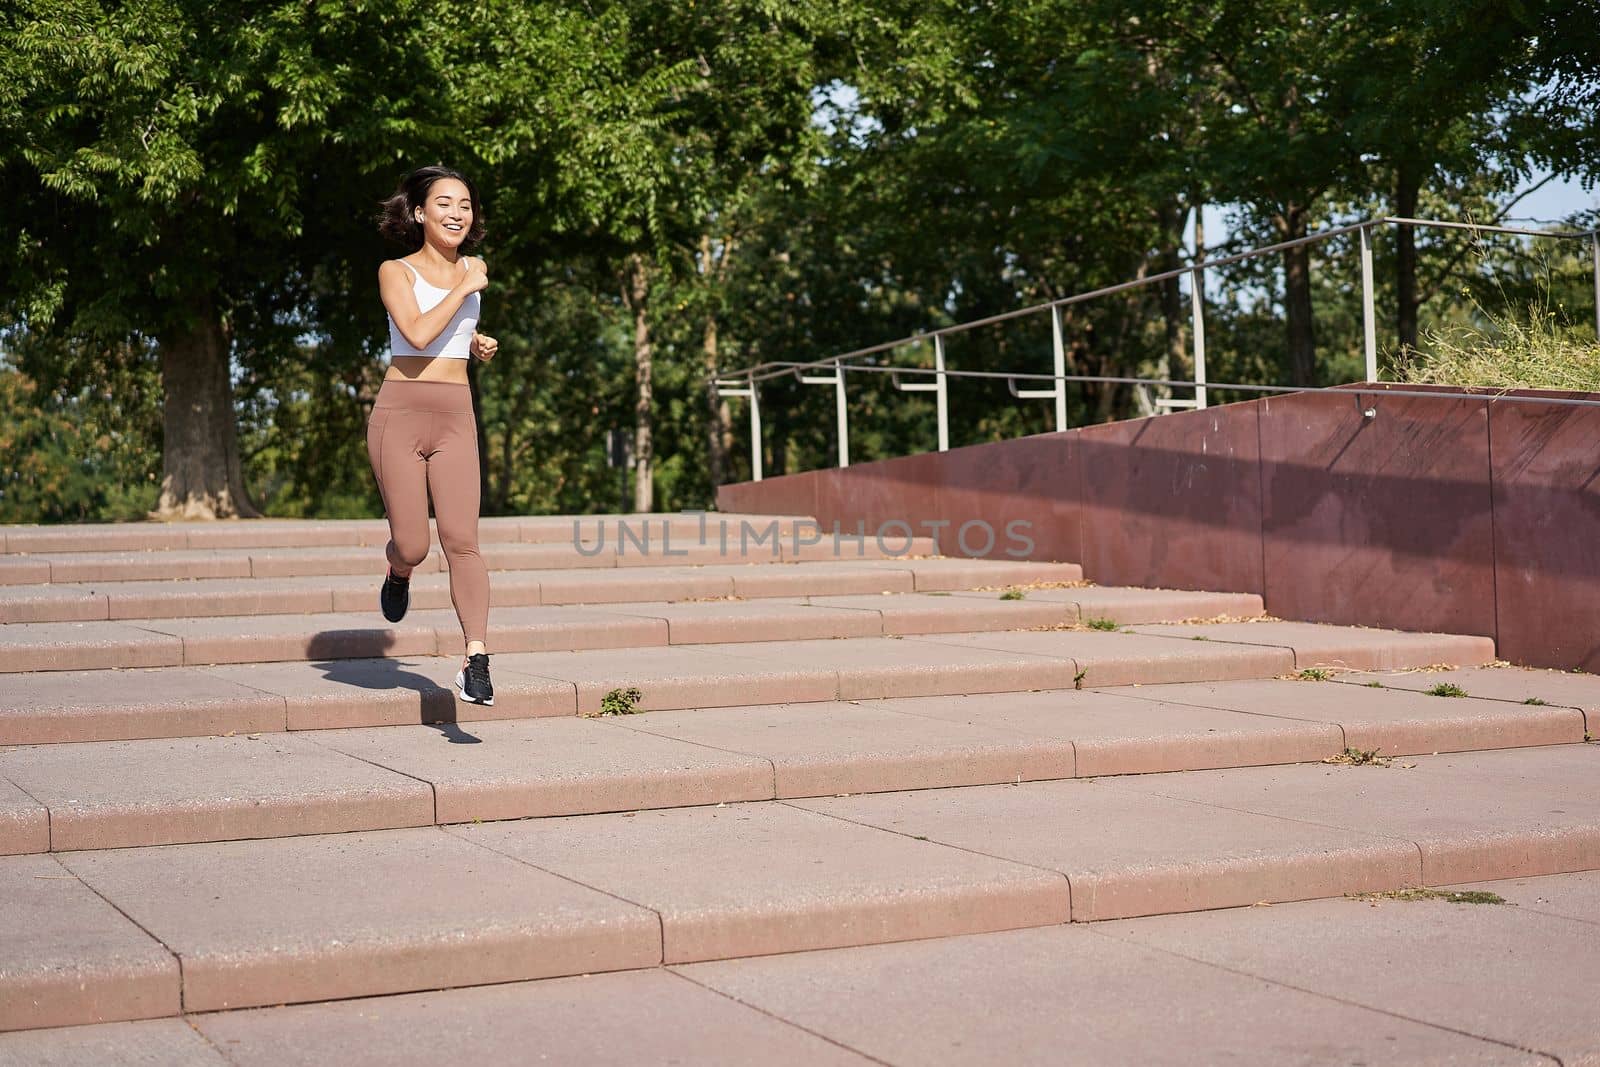 Healthy fitness girl running outdoors on street, wearing uniform, jogging on fresh air and listening music in wireless headphones.